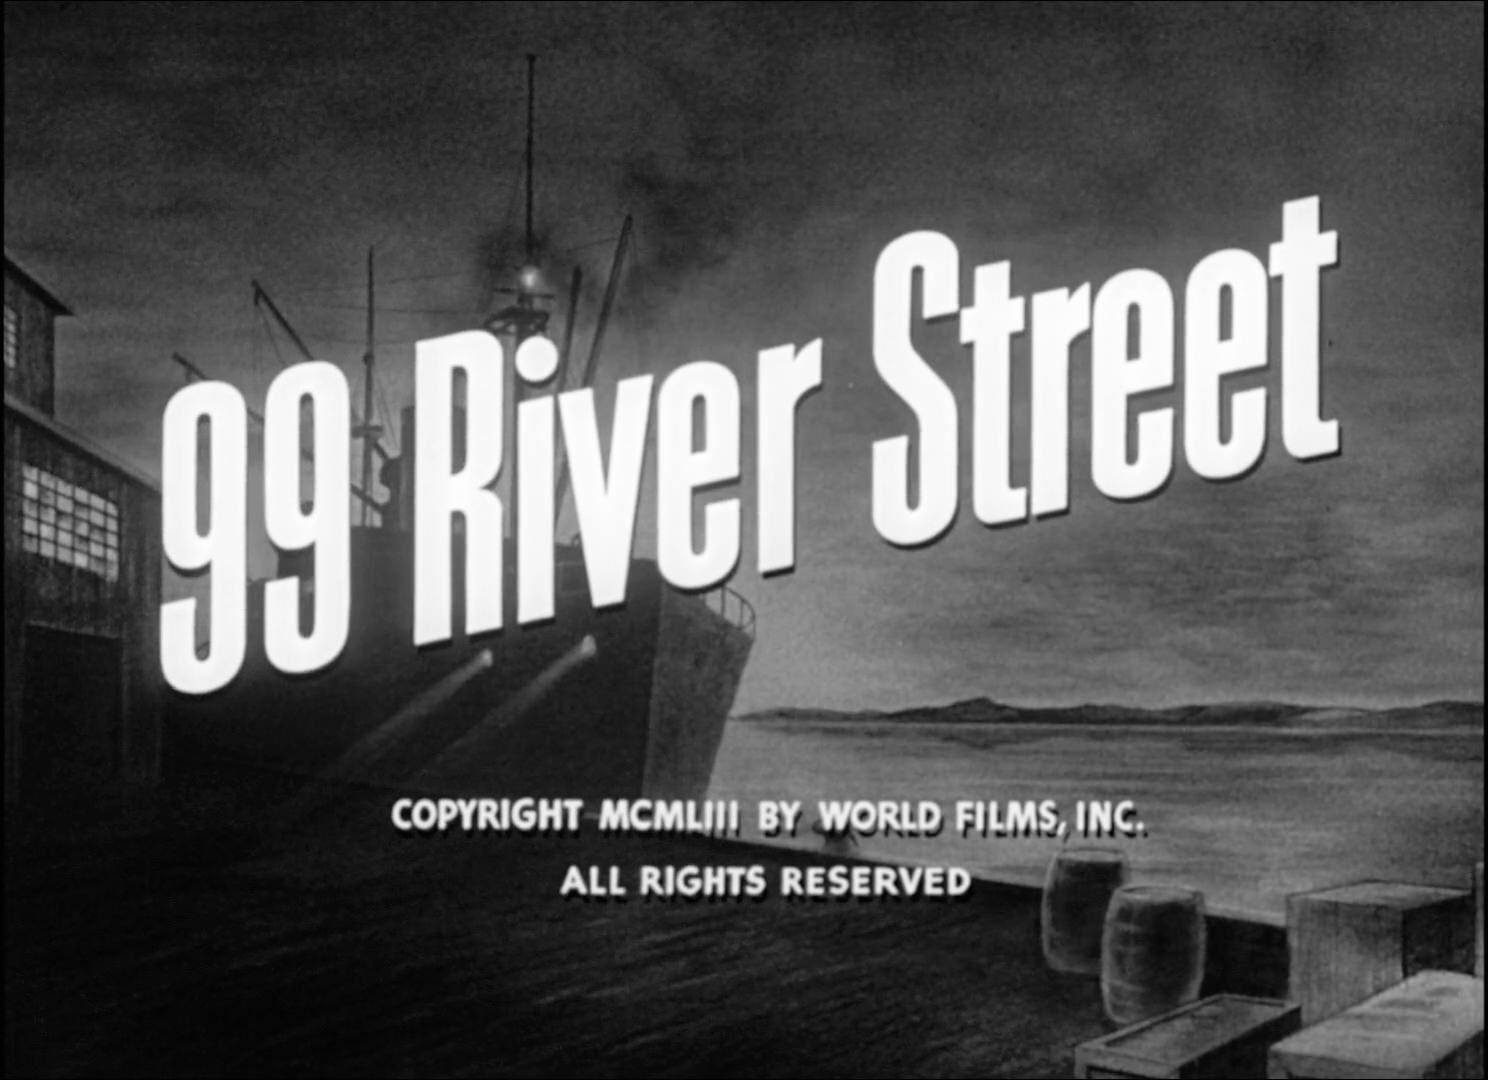 99 River Street Title Card